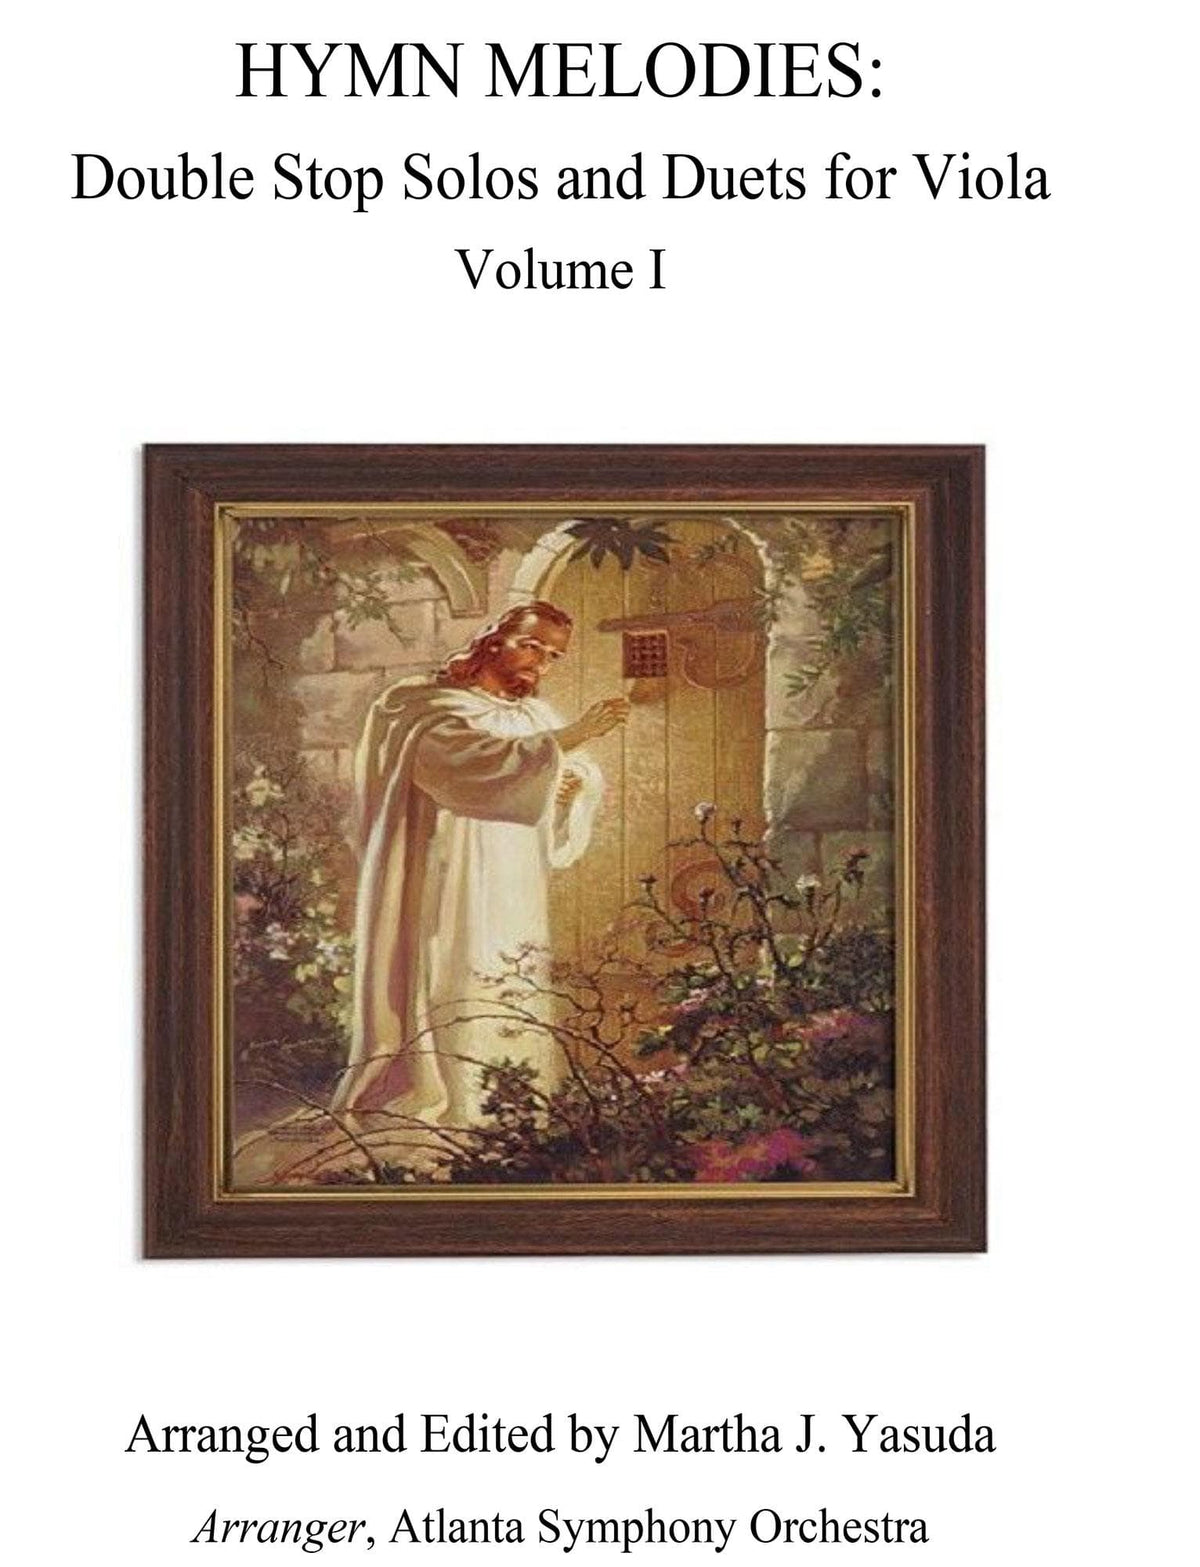 Yasuda, Martha - Hymn Melodies: Double Stop Solos and Duets For Viola, Volume I - Digital Download